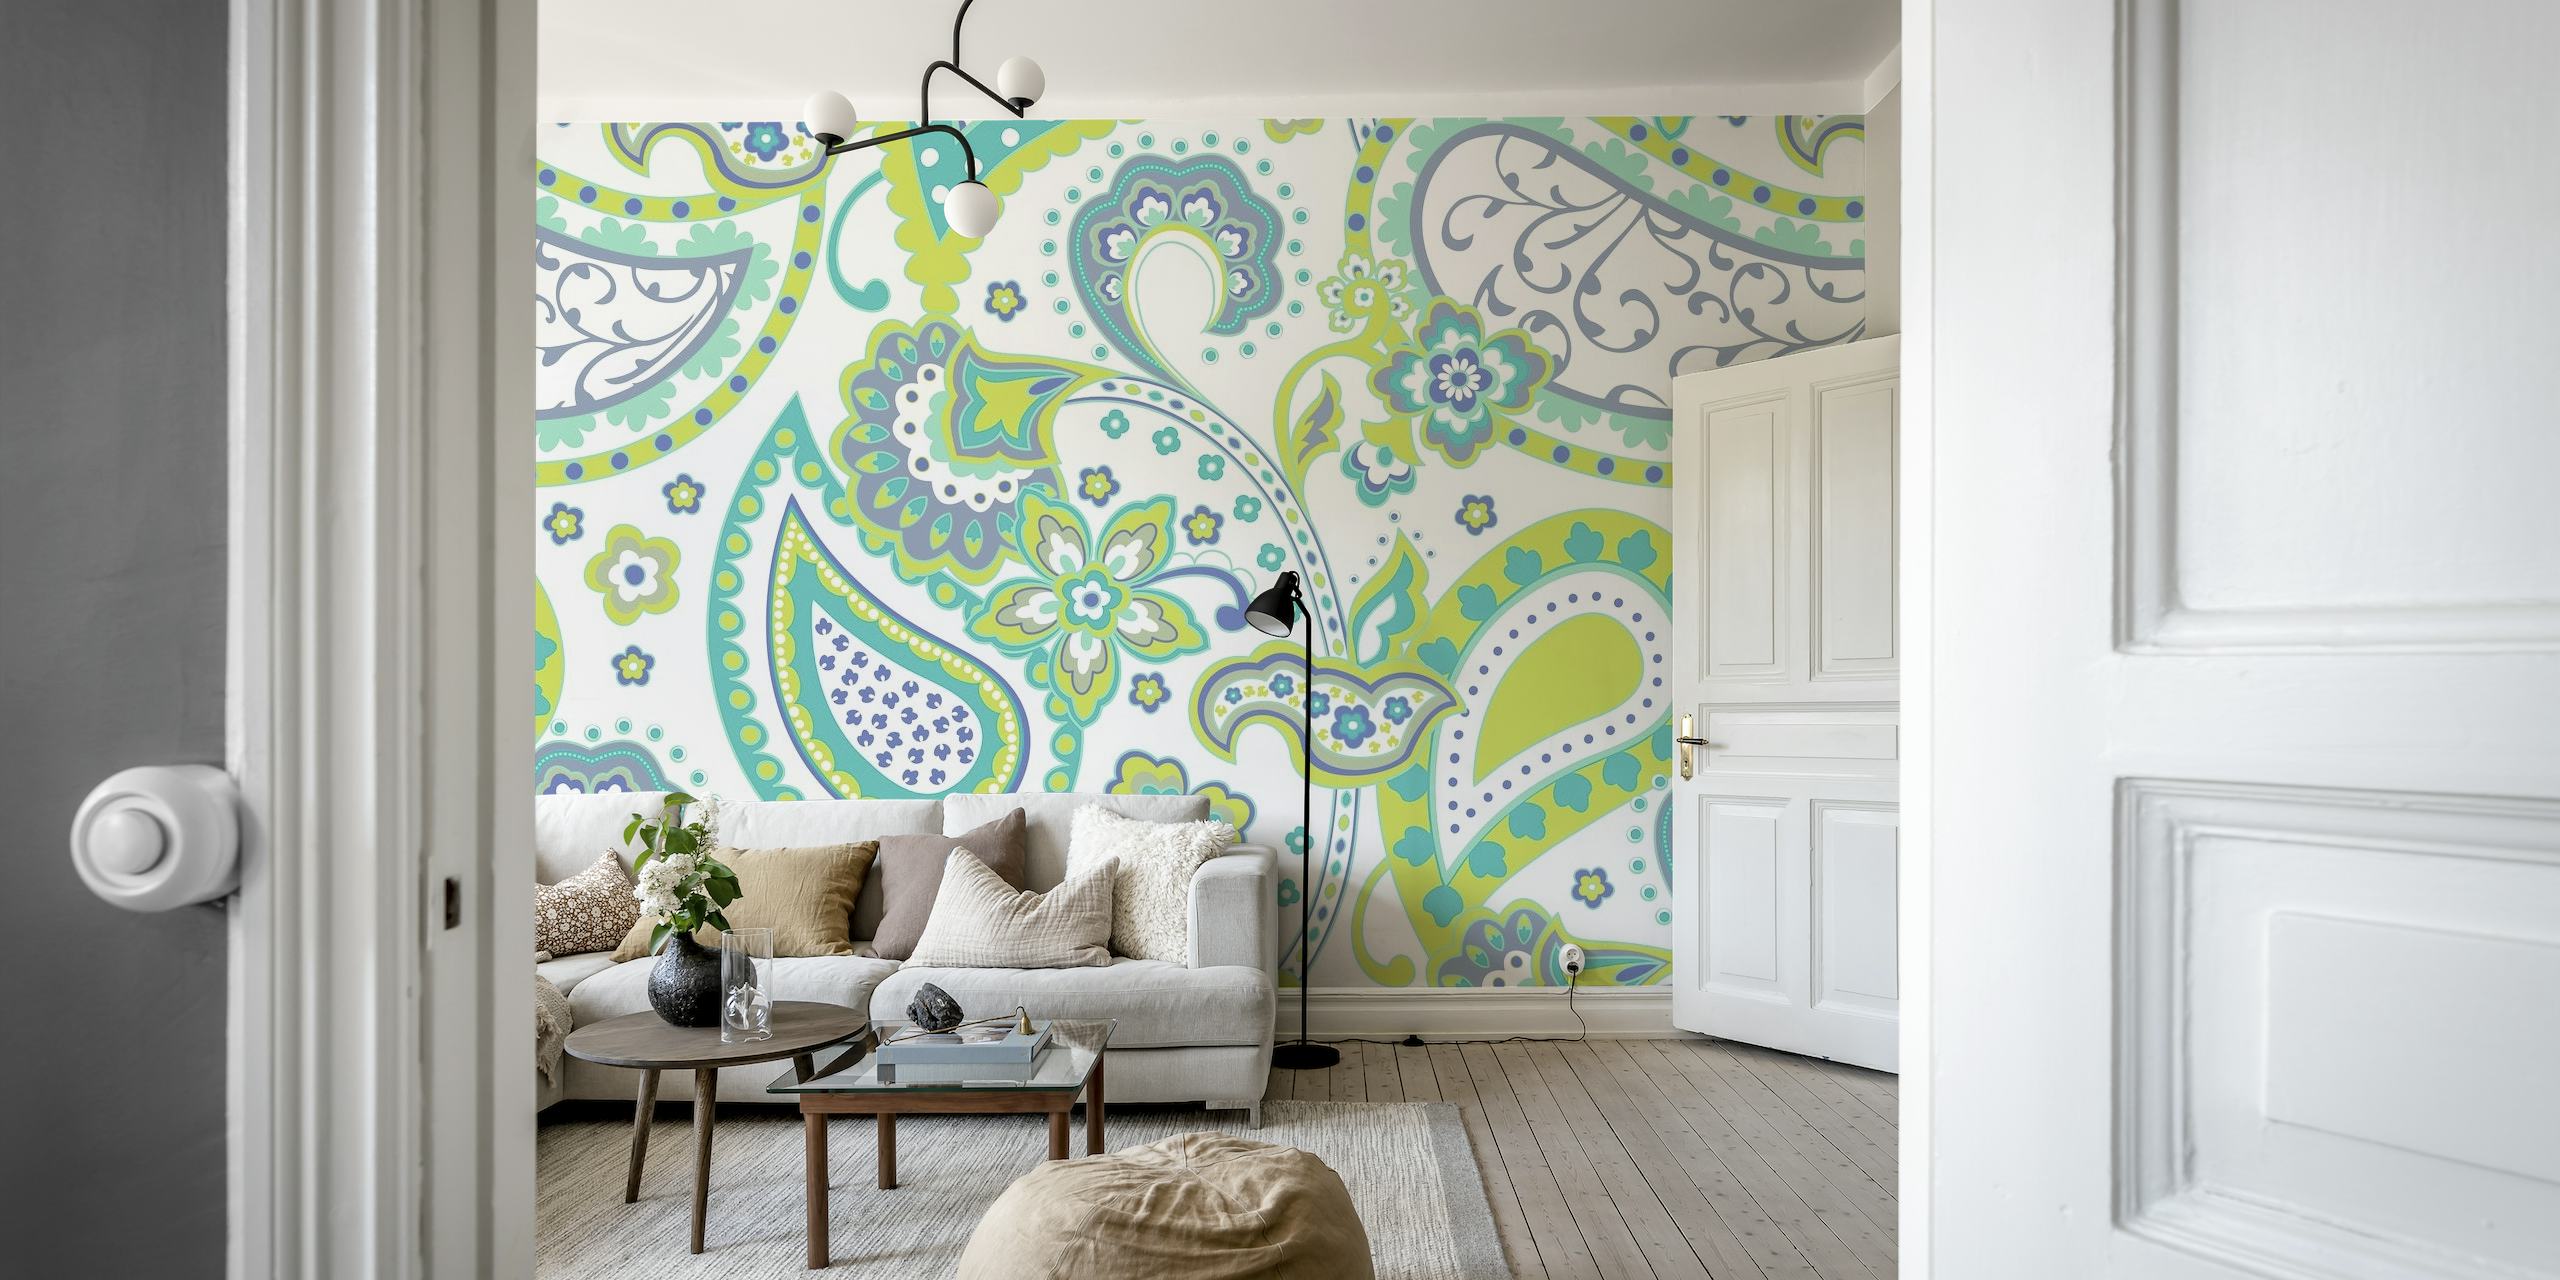 Paisley pattern wall mural in green, white, and blue